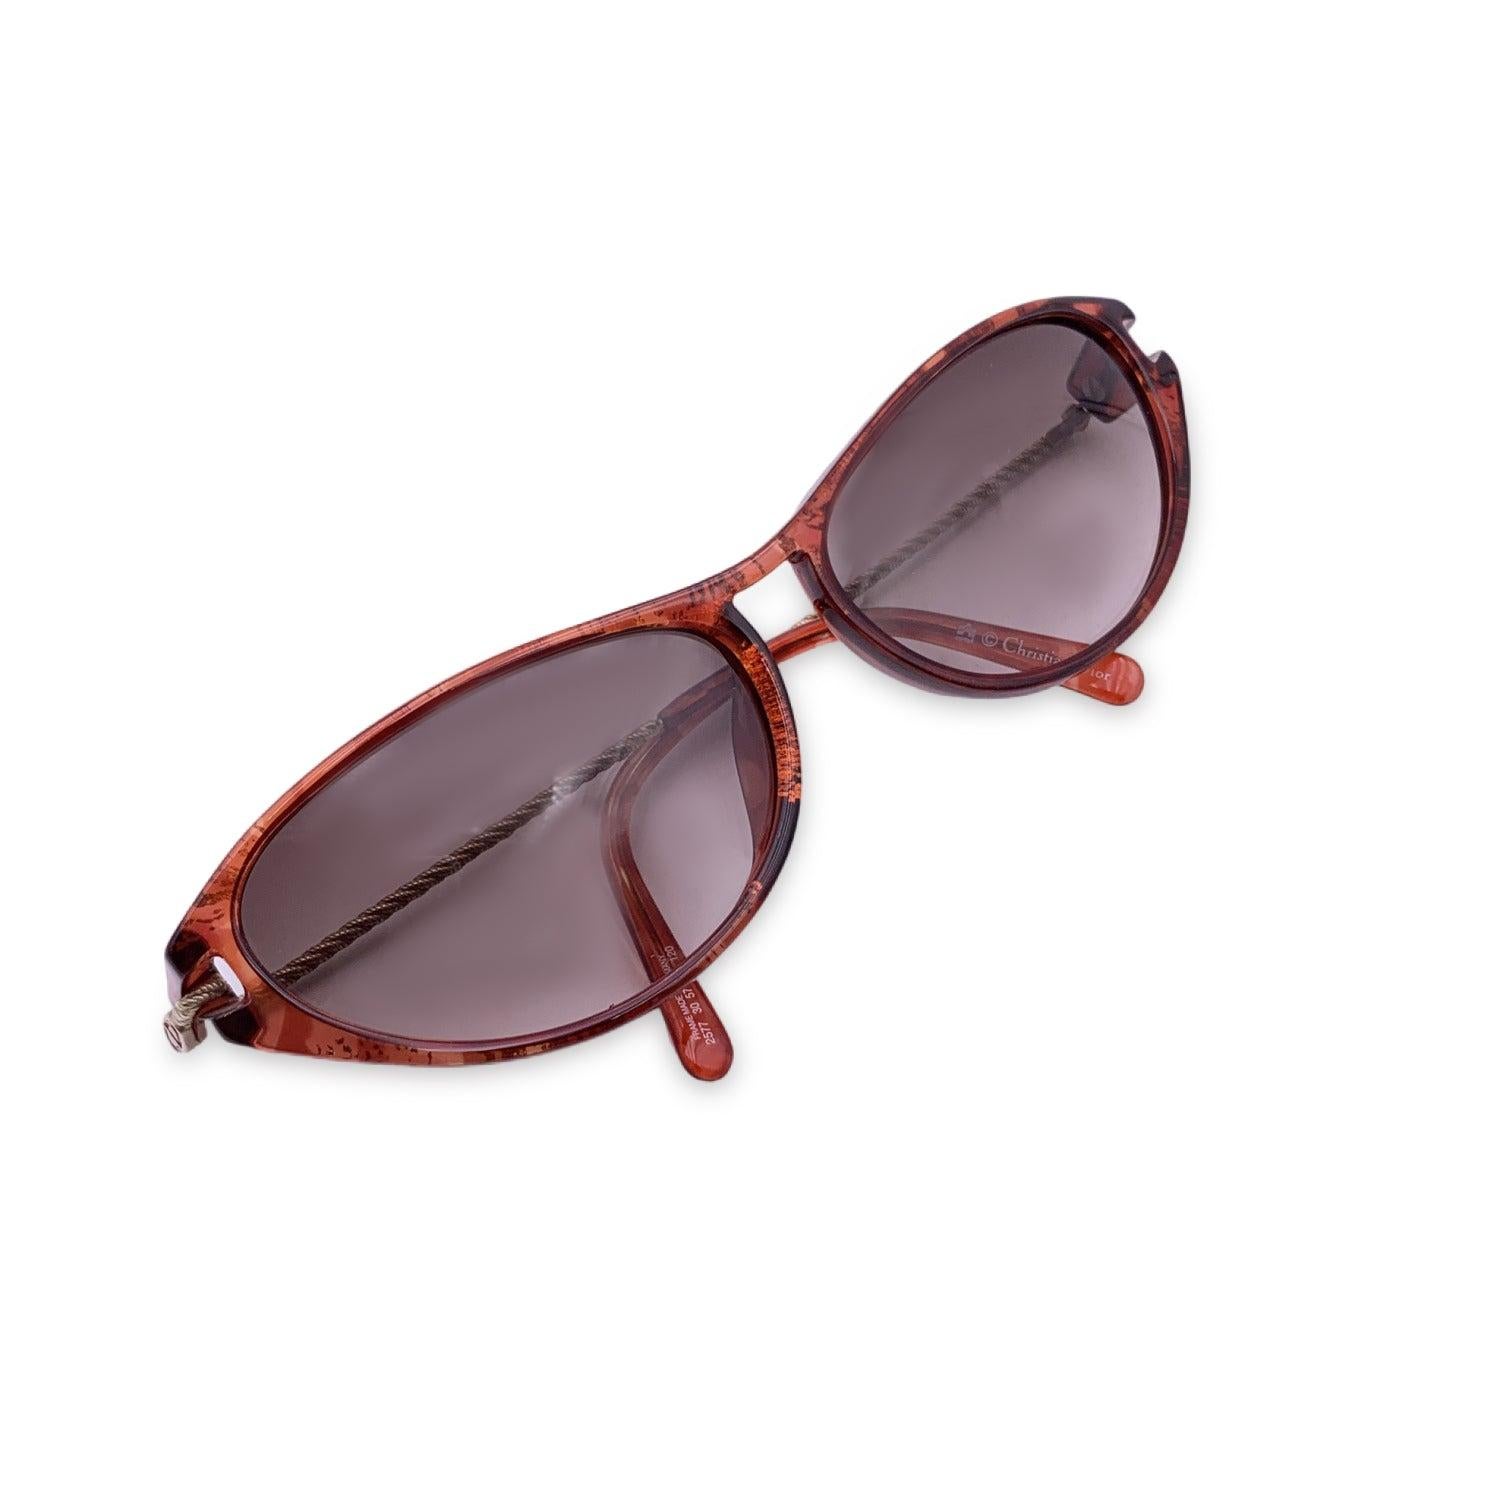 Vintage Christian Dior sunglasses, Mod. 2577 30 Optyl. Size: 57/13 120mm. Reddish brown and gold acetate cat eye frame with gold metal ear stems. Original 100% Total UVA/UVB protection lenses in brown color. CD logo on temples. Details MATERIAL: